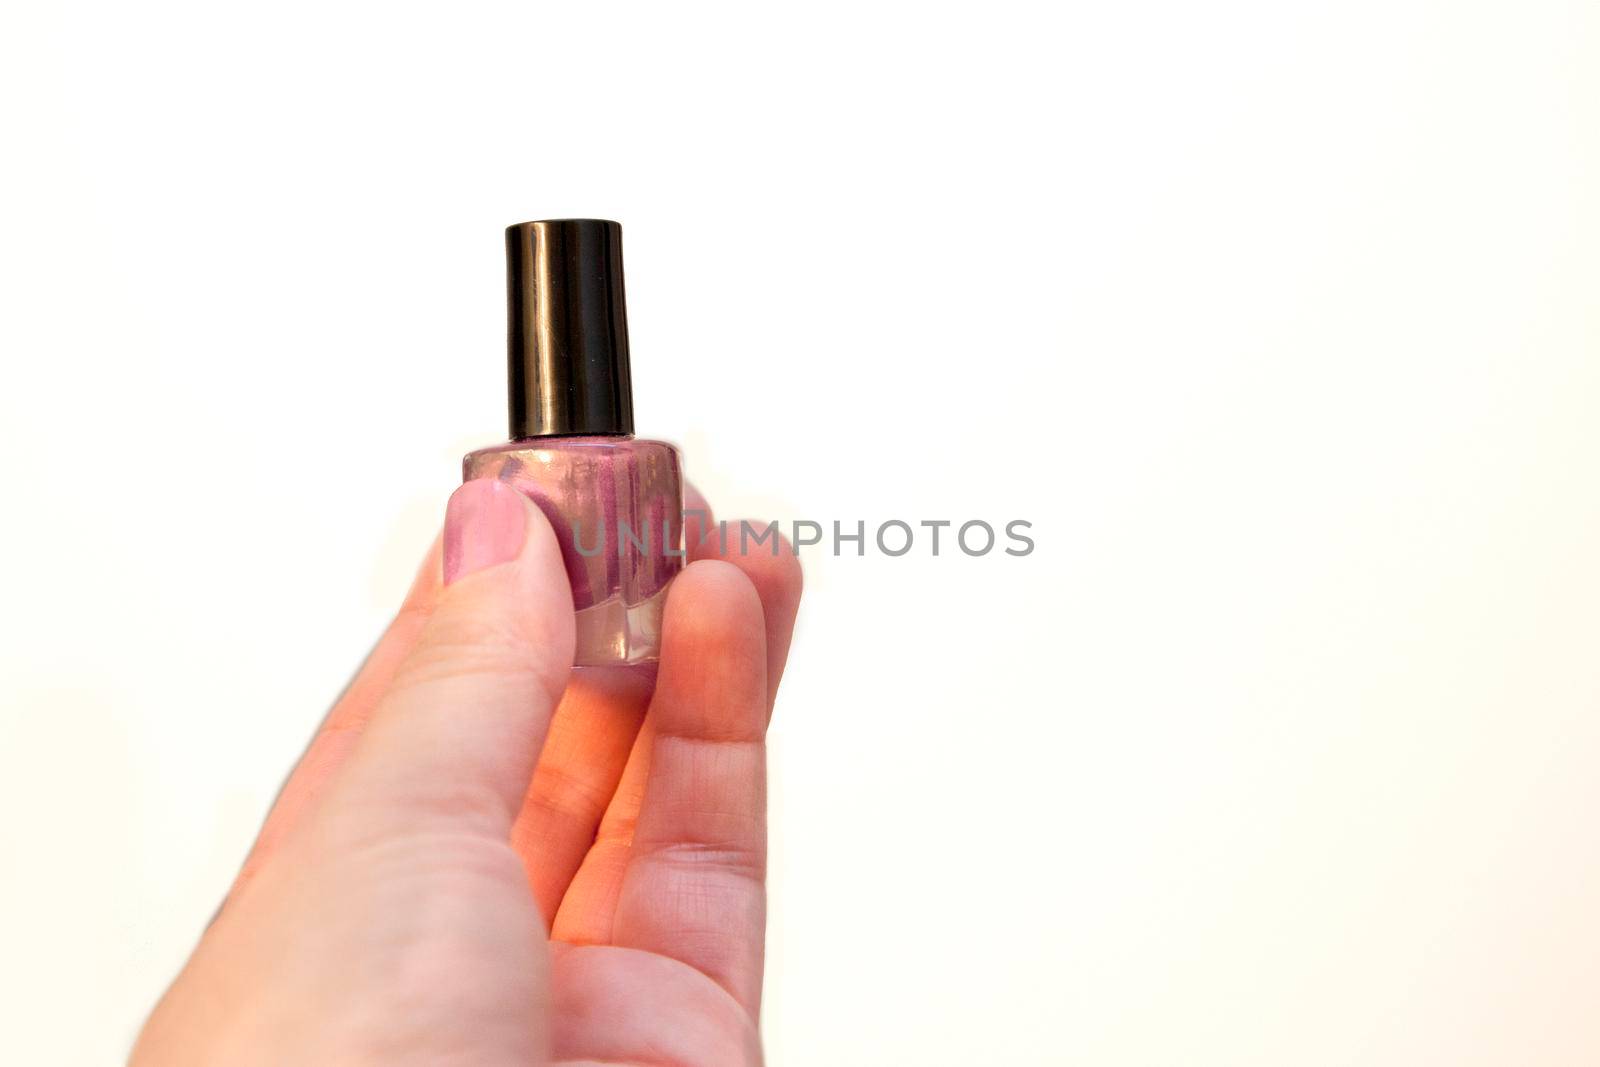 A hand holding a glass bottle with pink shiny nail polish with a black cap against white copy space